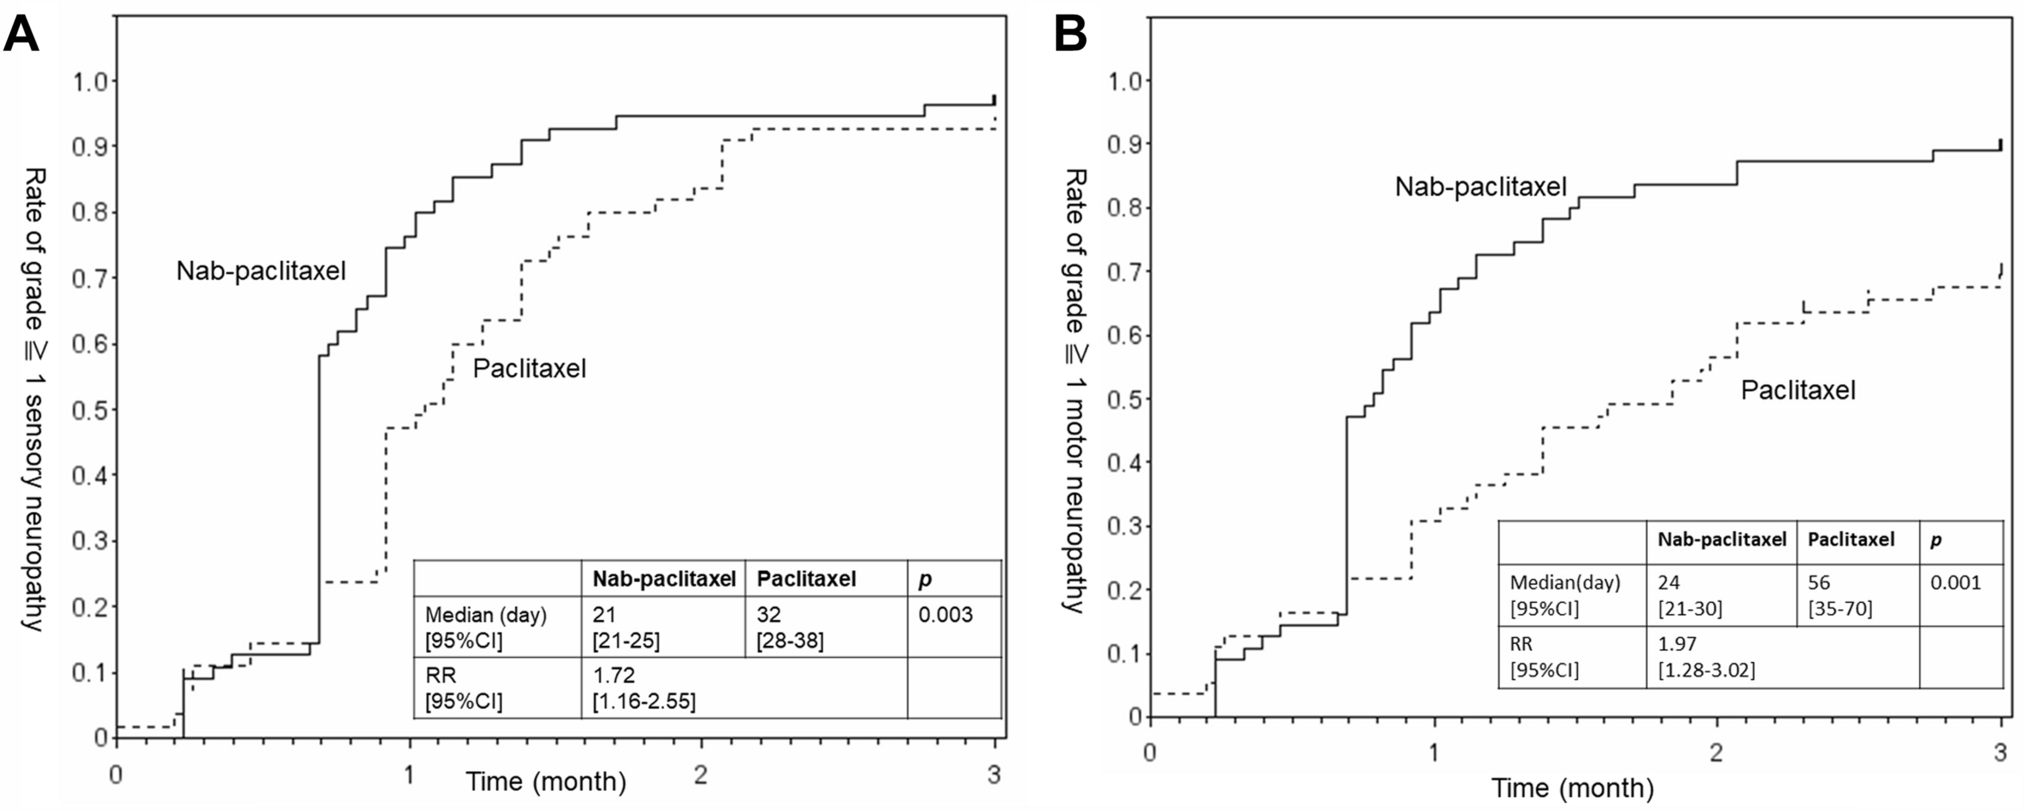 A prospective comparison study utilizing patient-reported outcomes of taxane-related peripheral neuropathy between nab-paclitaxel and standard paclitaxel in patients with breast cancer